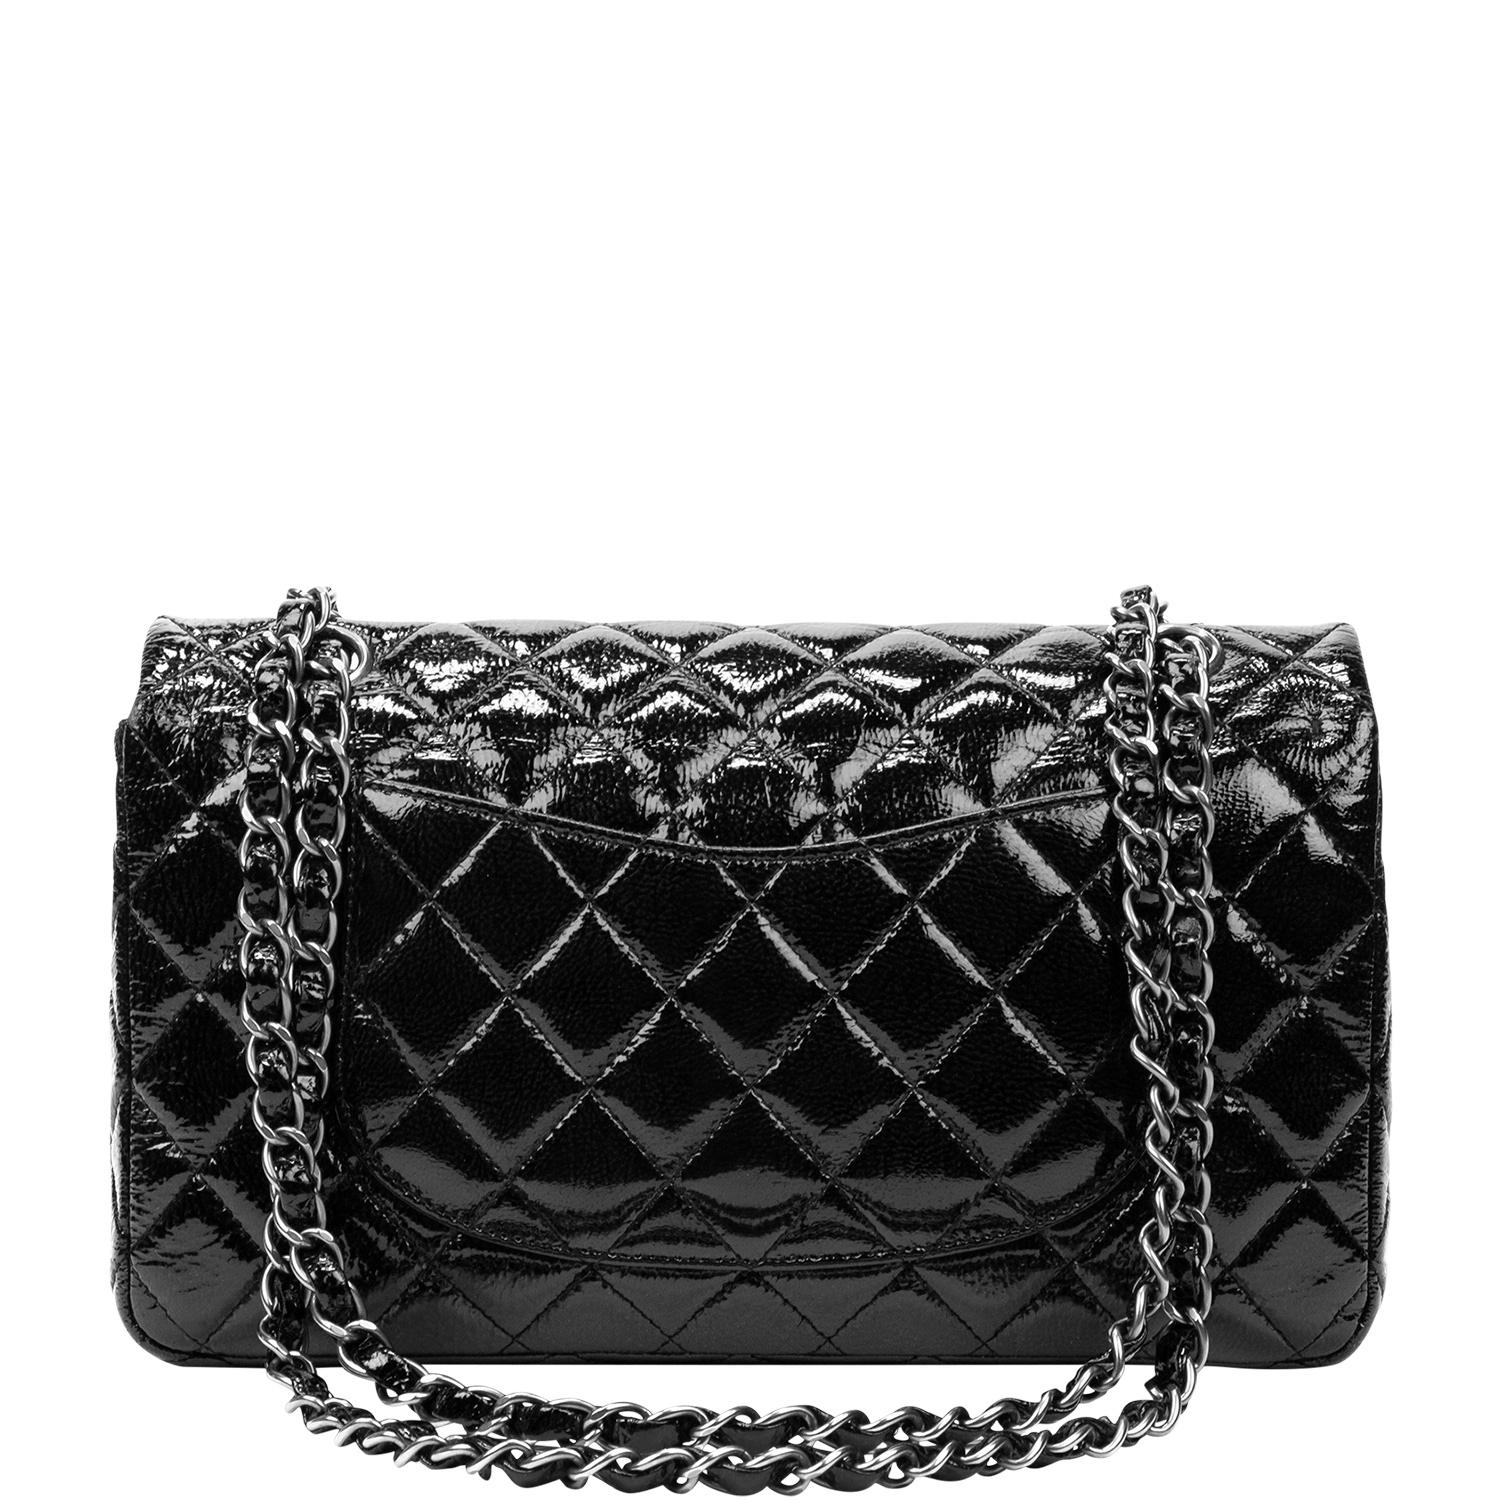 Women's or Men's Chanel Black Patent Small Double Flap Bag